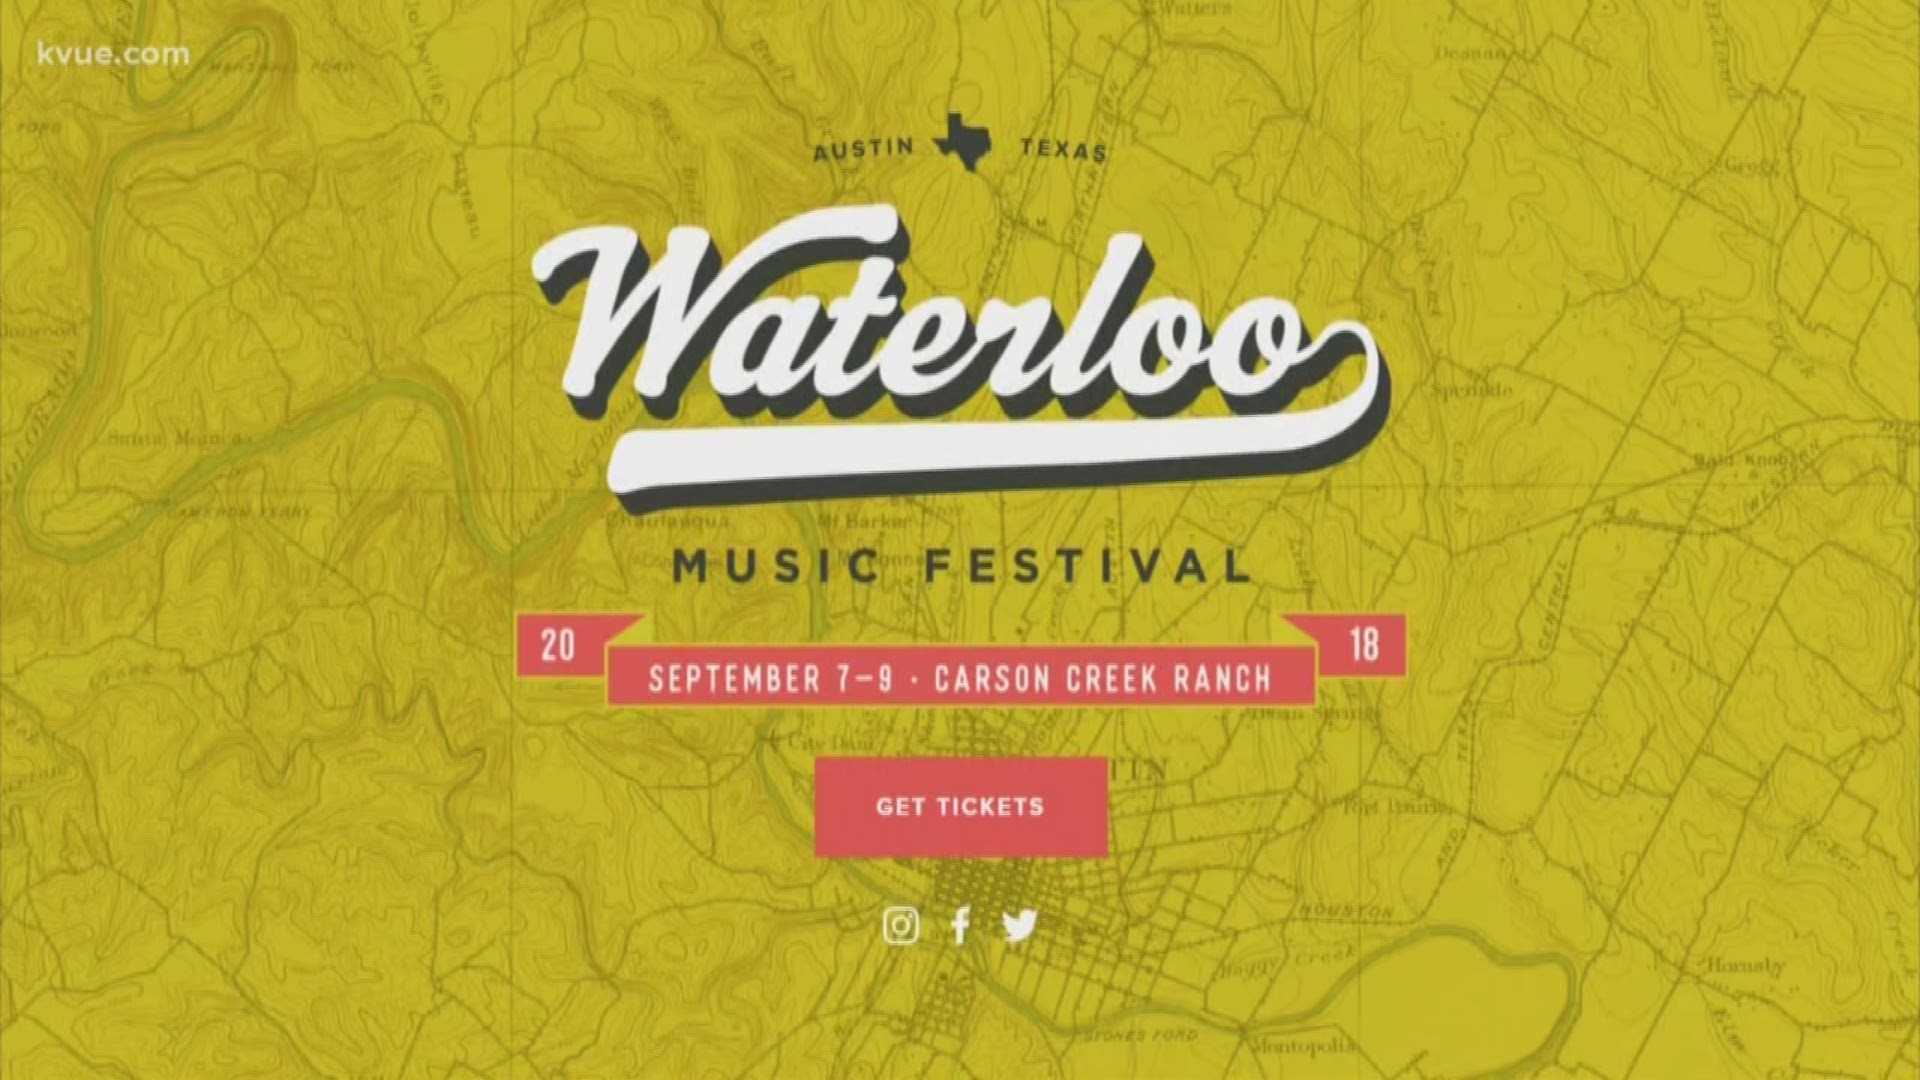 Longtime local record store Waterloo Records is suing organizers of the new Waterloo Music Festival over its name.